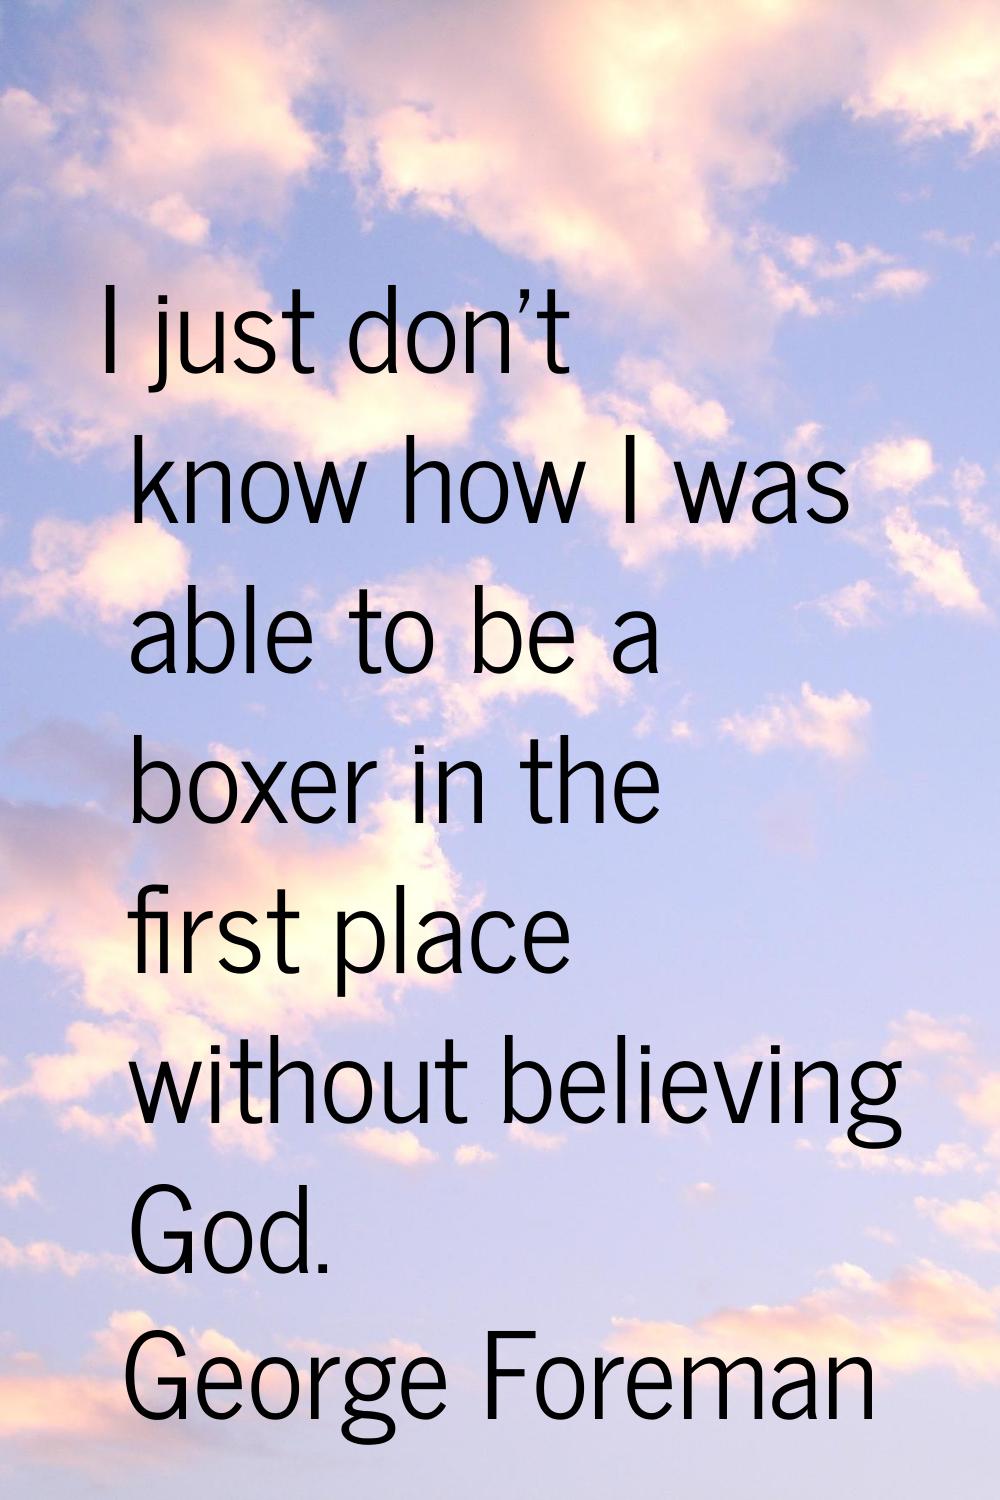 I just don't know how I was able to be a boxer in the first place without believing God.